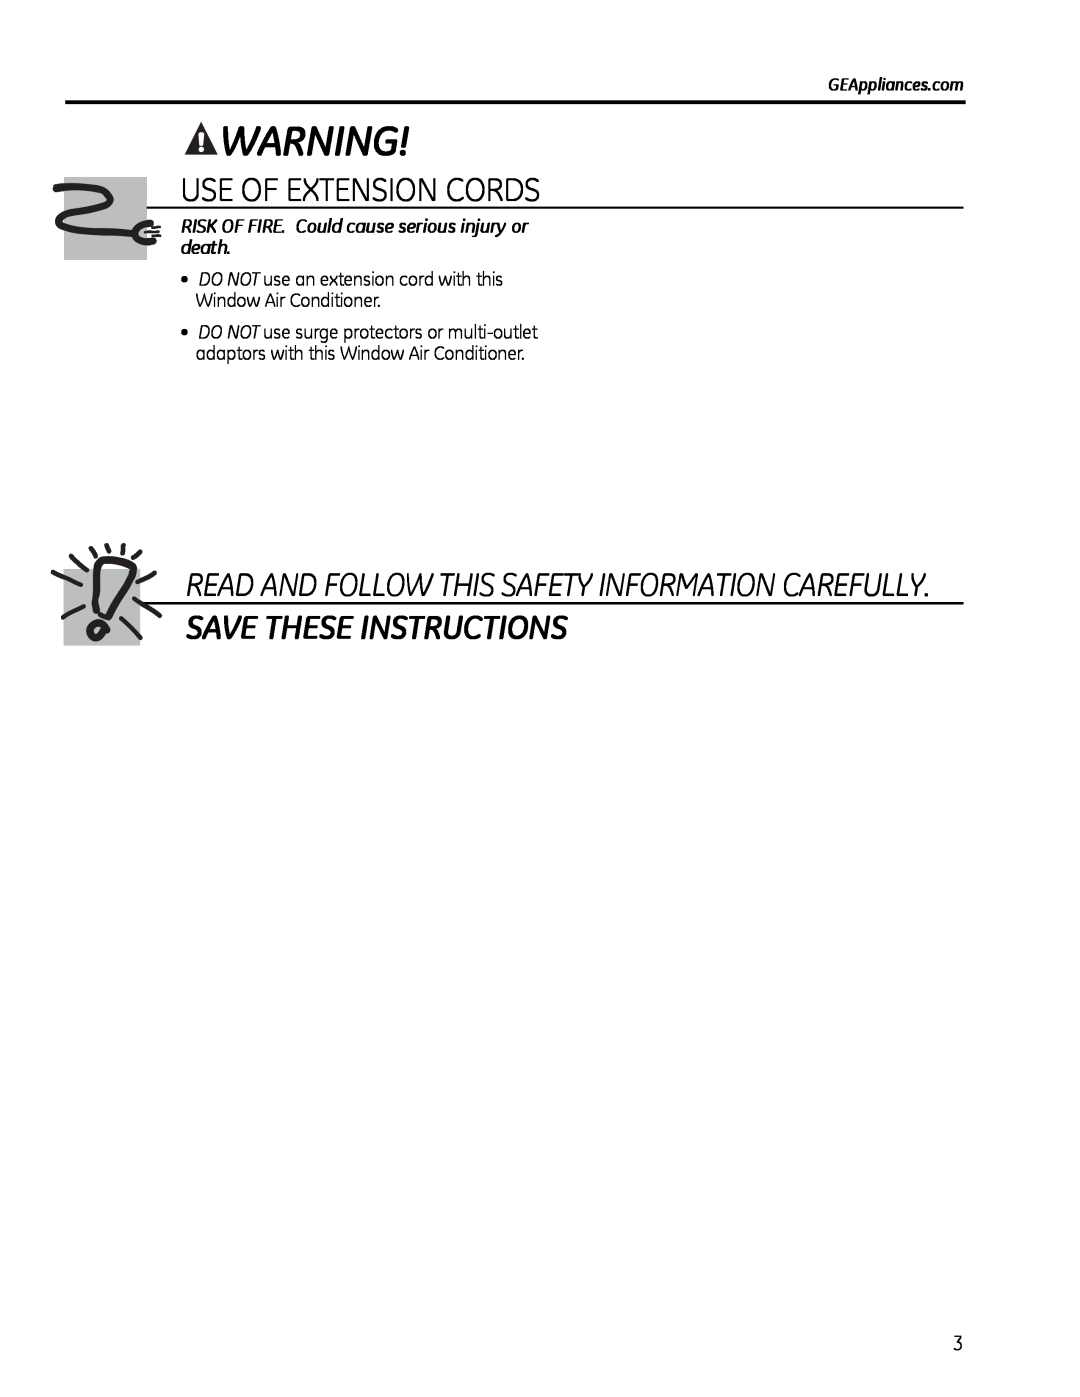 GE AHH24, AHM24 Use Of Extension Cords, Save These Instructions, RISK OF FIRE. Could cause serious injury or death 